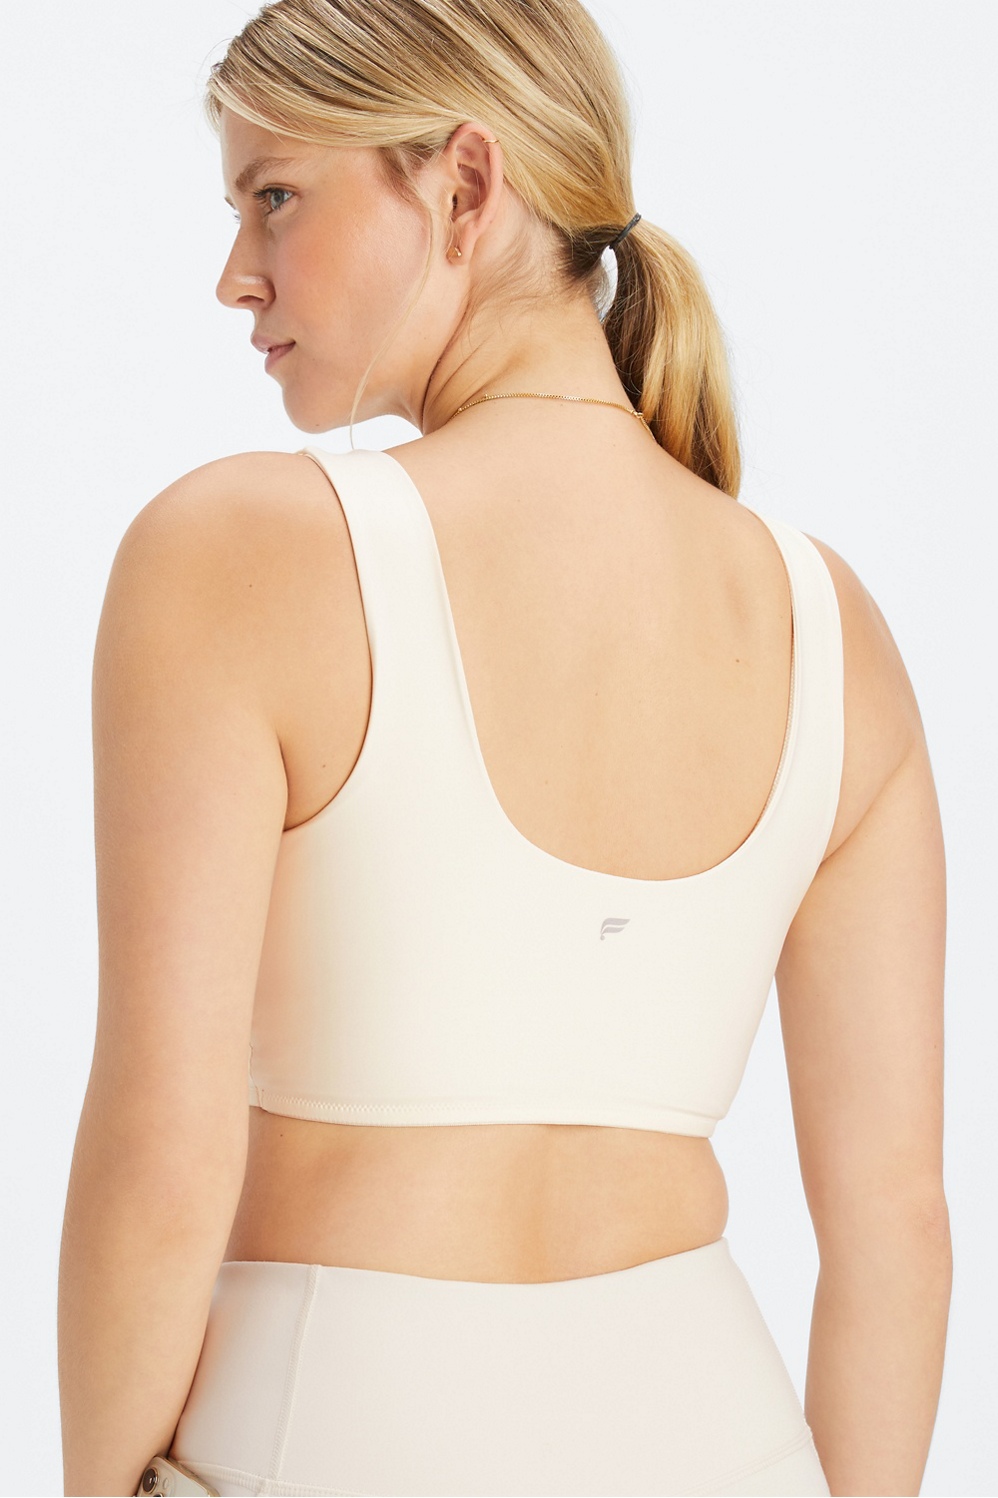 Crossover Ruched Low-Impact Sports Bra in Dusty Blue